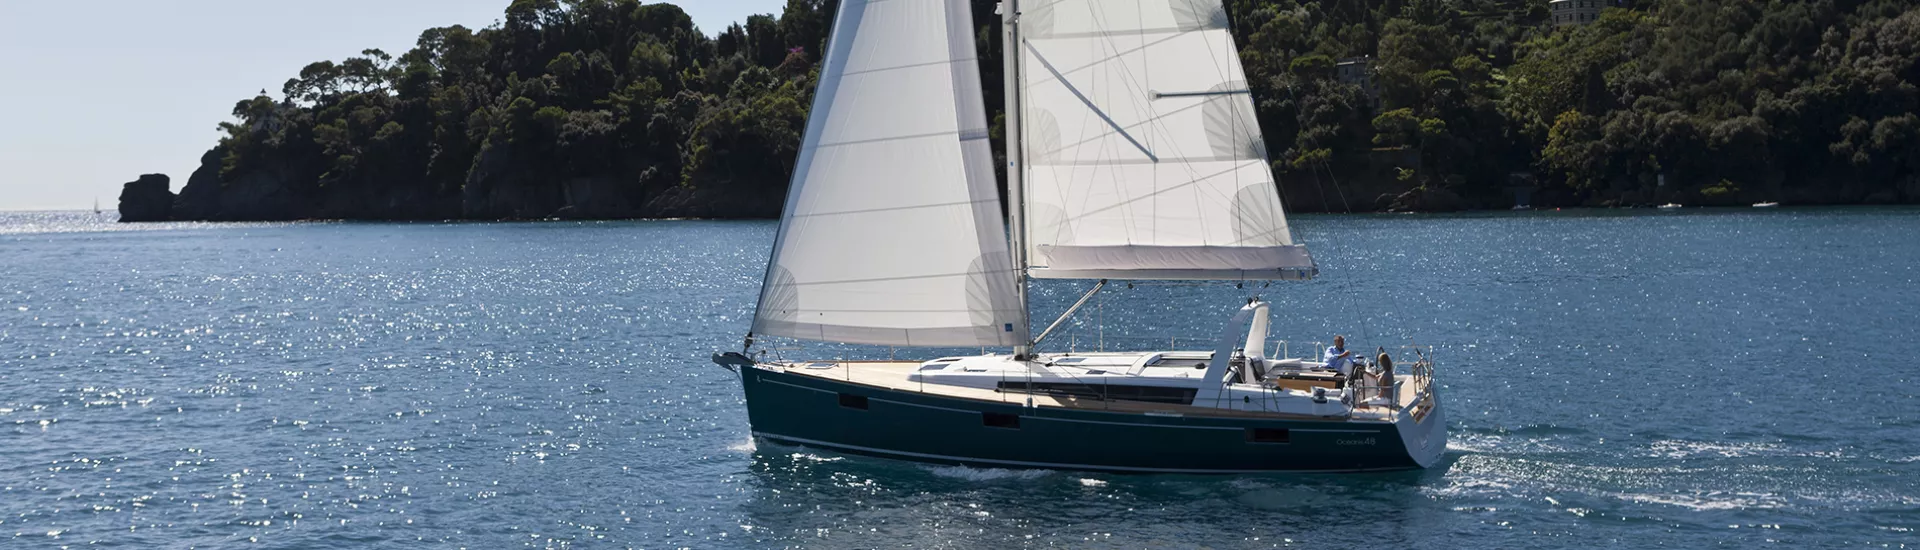 48 foot sailboat for sale